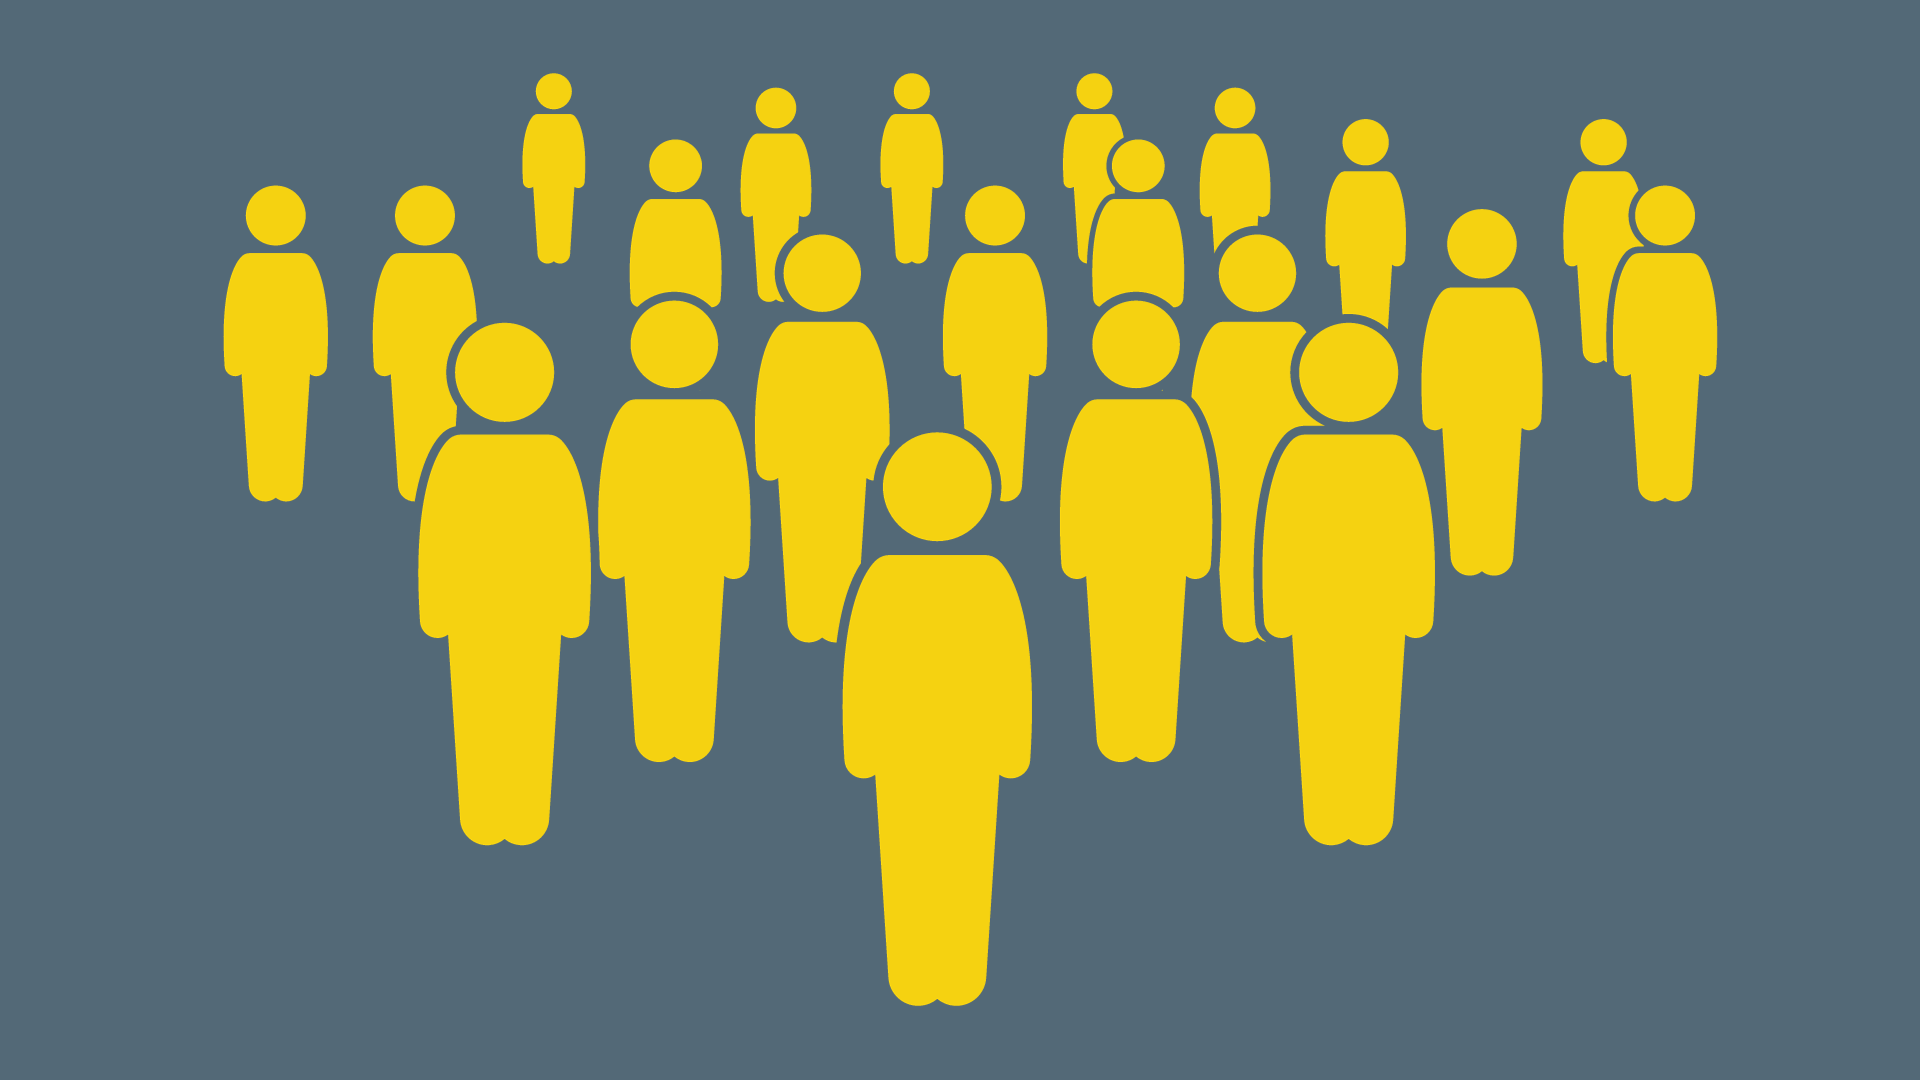 A graphic of simplified shapes of lots of people - they are yellow on a grey background